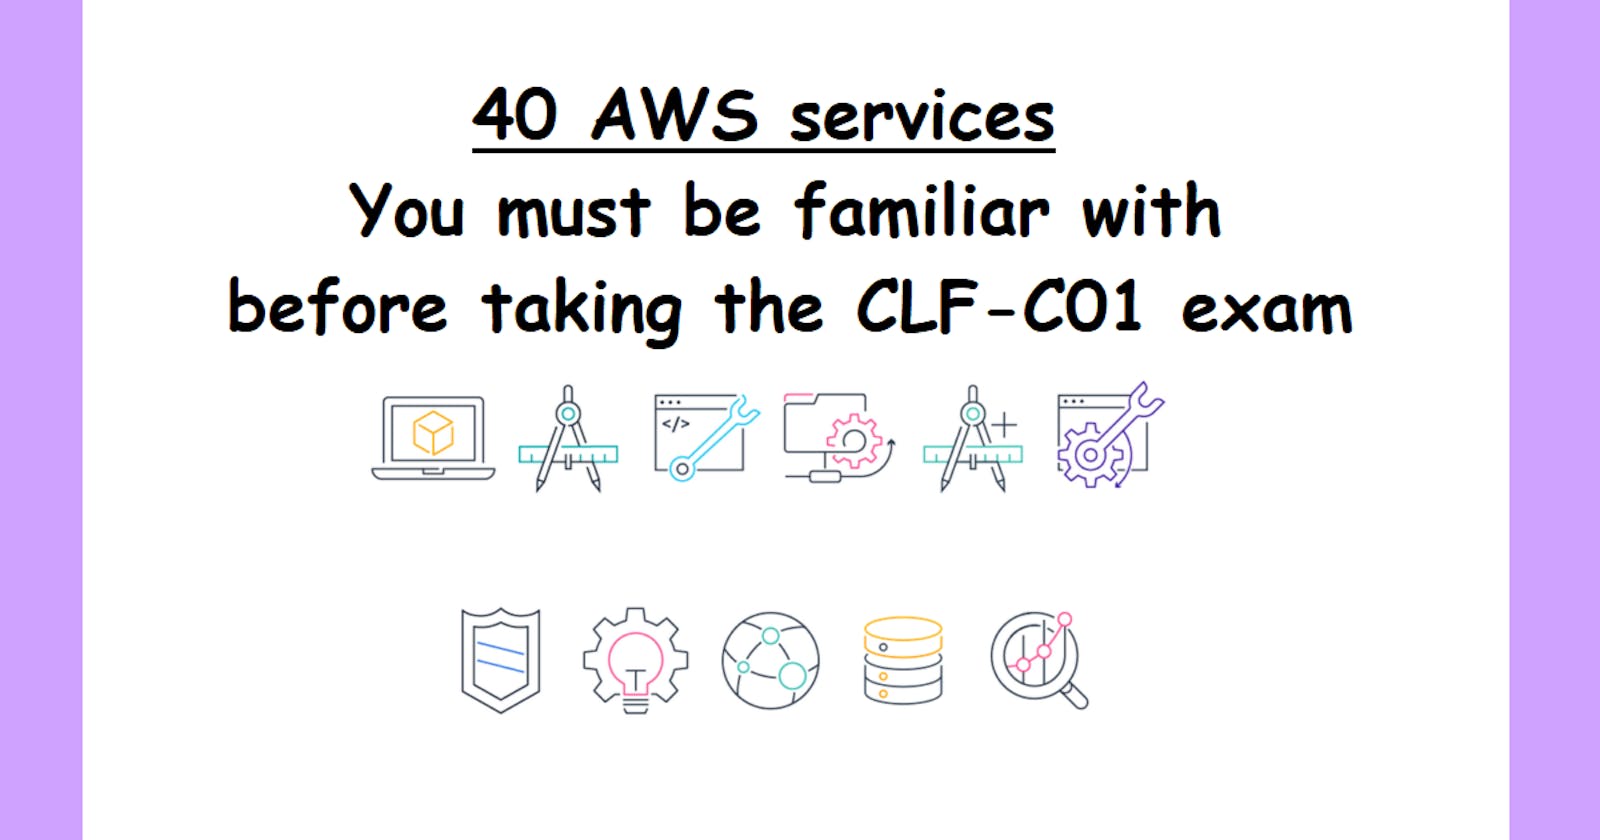 40 AWS services you must be familiar with before taking the CLF-C01 exam